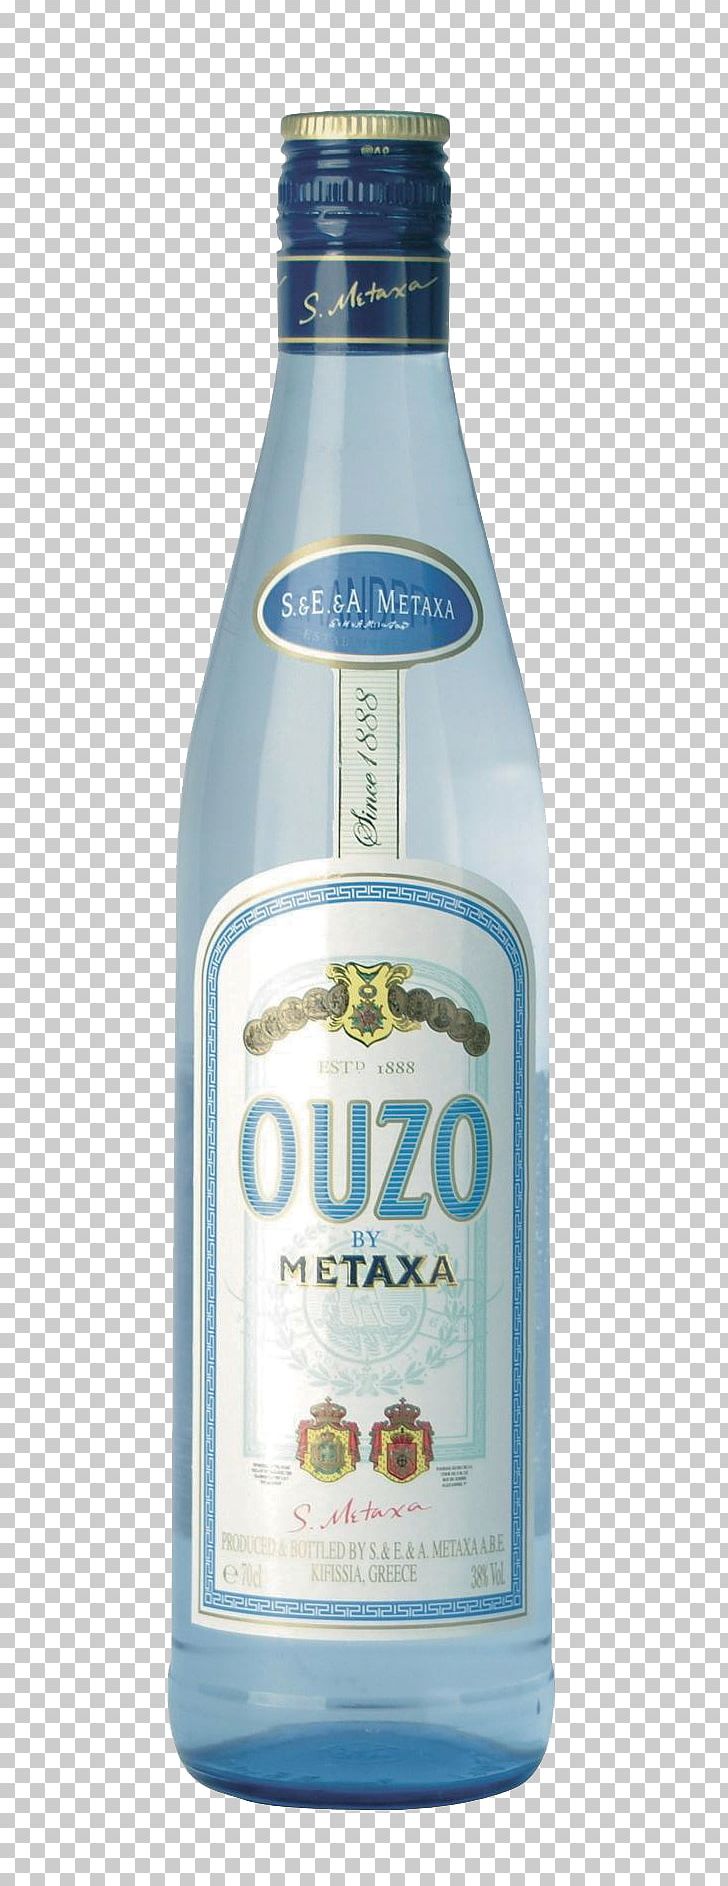 Liqueur Ouzo Metaxa Distilled Beverage Tsipouro PNG, Clipart, Alcoholic Beverage, Anise, Aperitif, Bottle, Brandy Free PNG Download